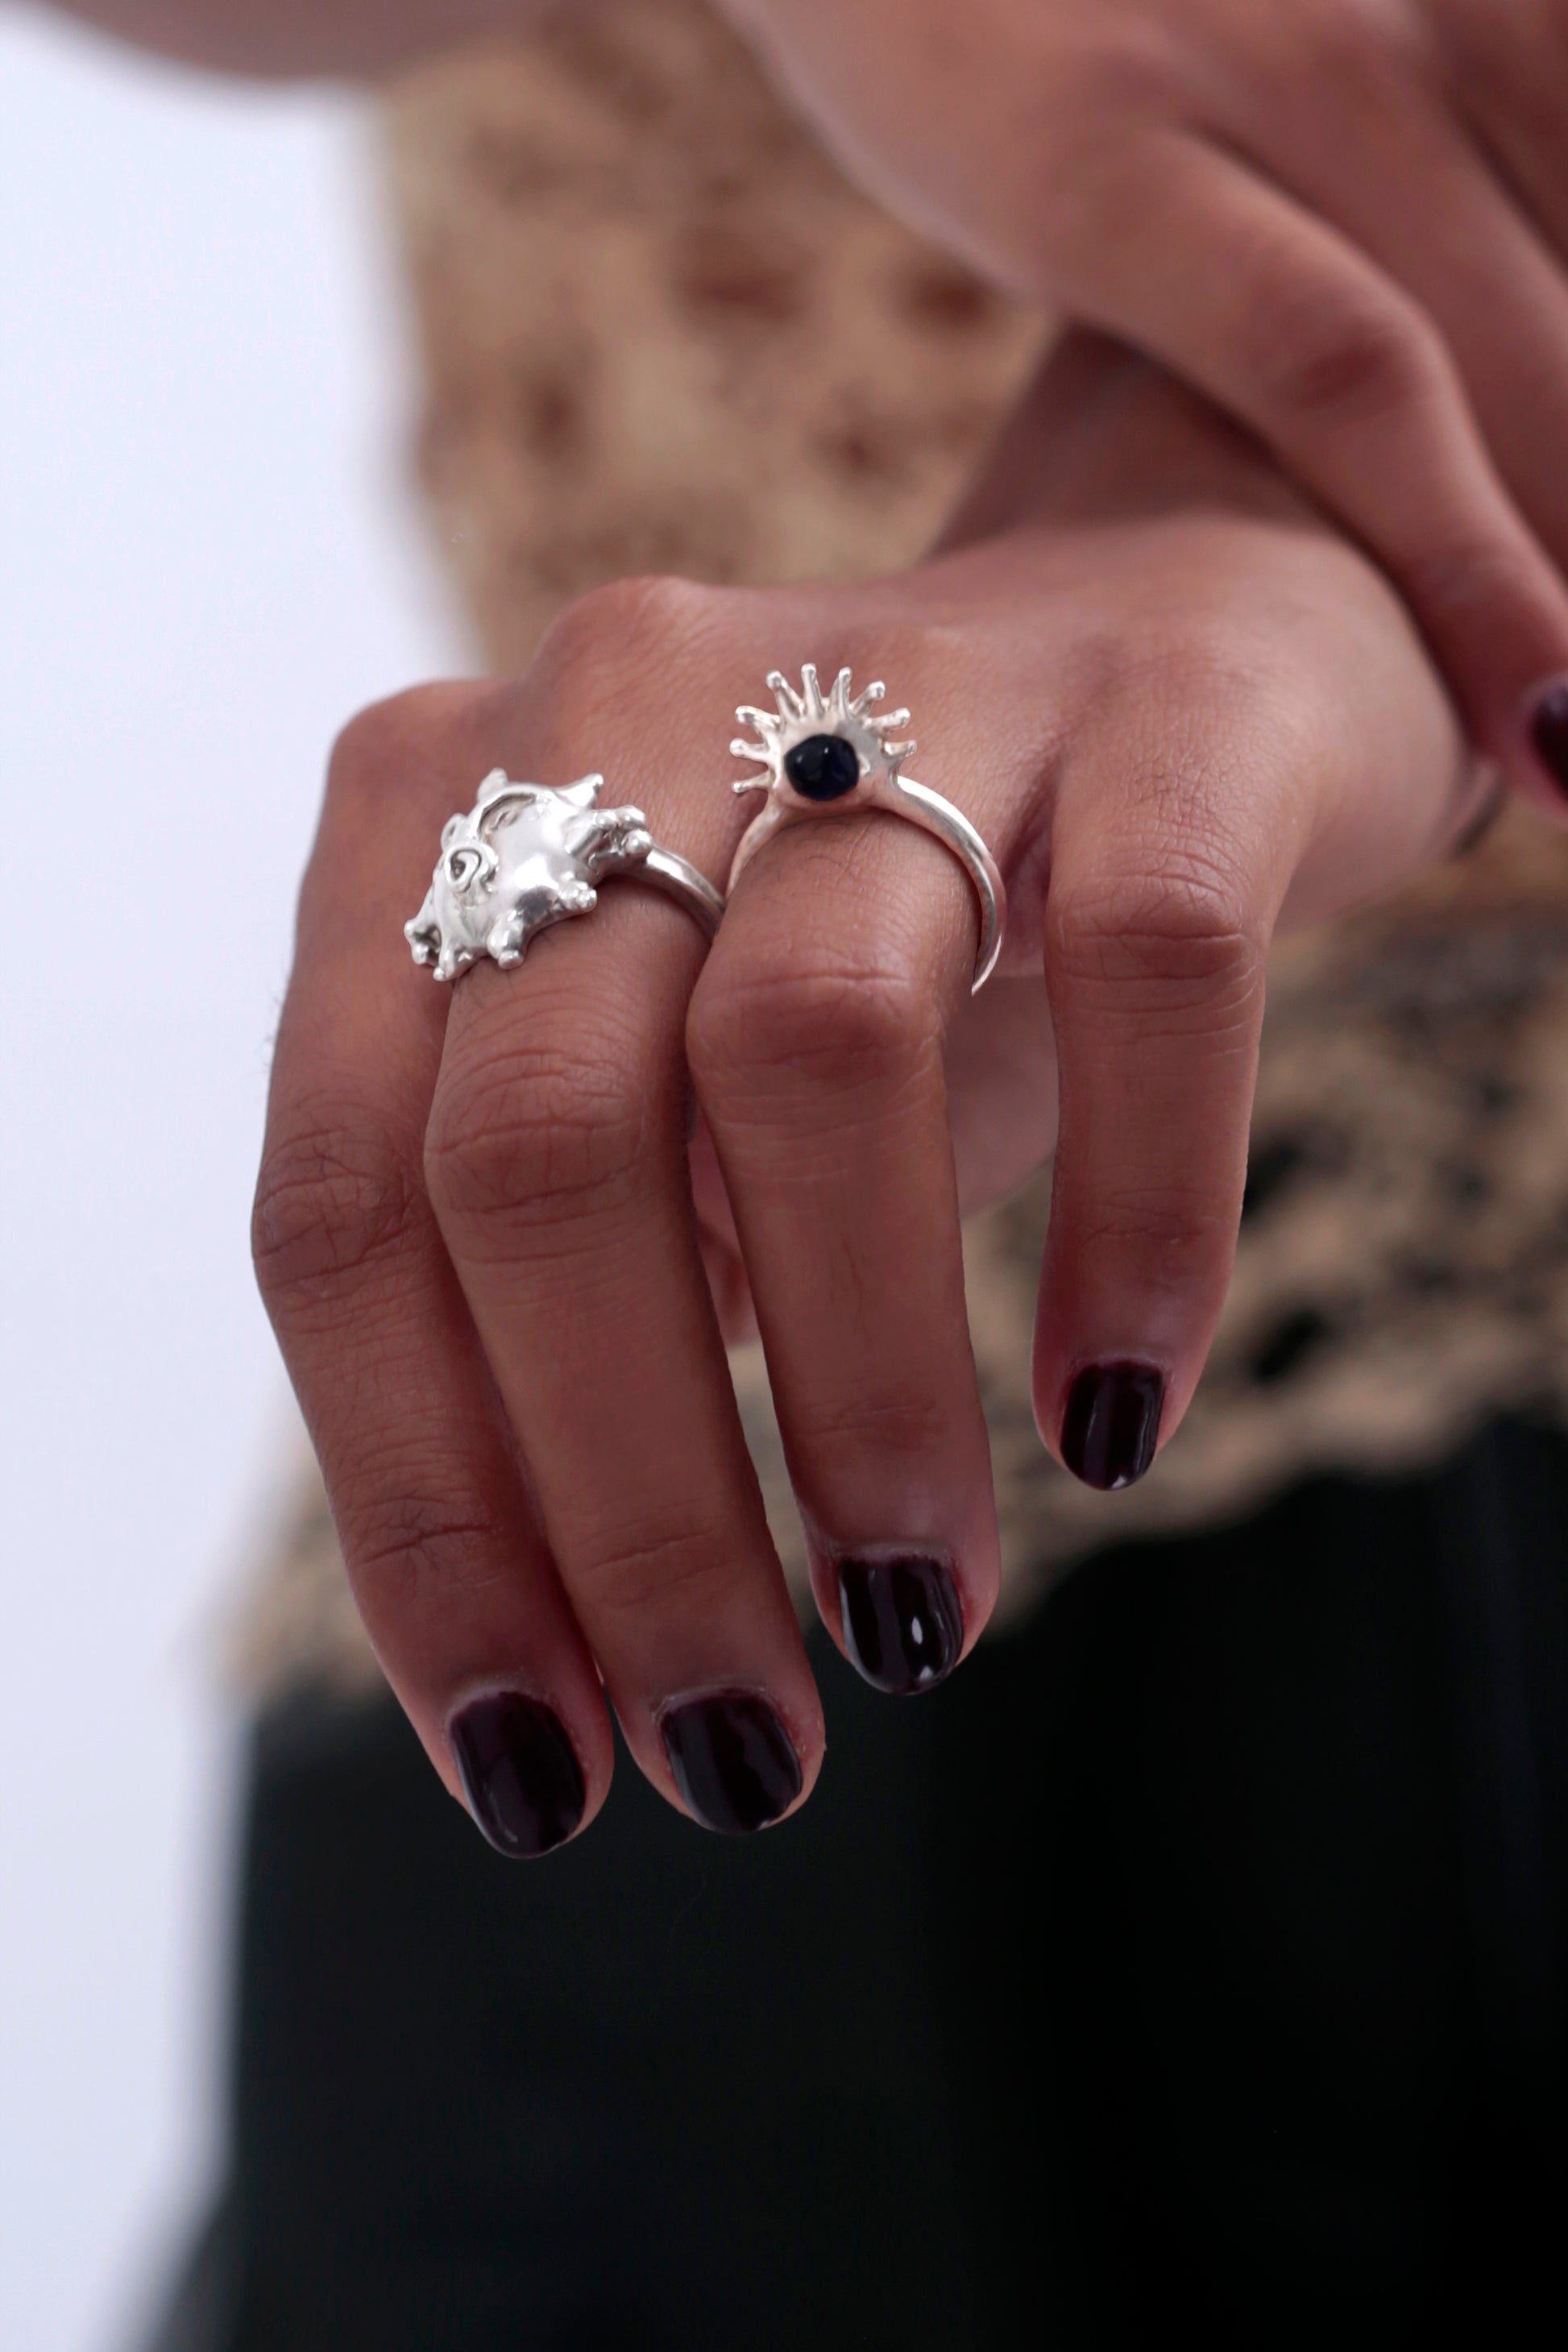 Model is wearing a sculptural Sol Ring by CLARK. The photo shows the starburst design with high quality Sterling Silver rays like a sun around a luxurious purple gemstone. This is a statement handmade piece of jewelry handcraft using the lost wax casting method. 